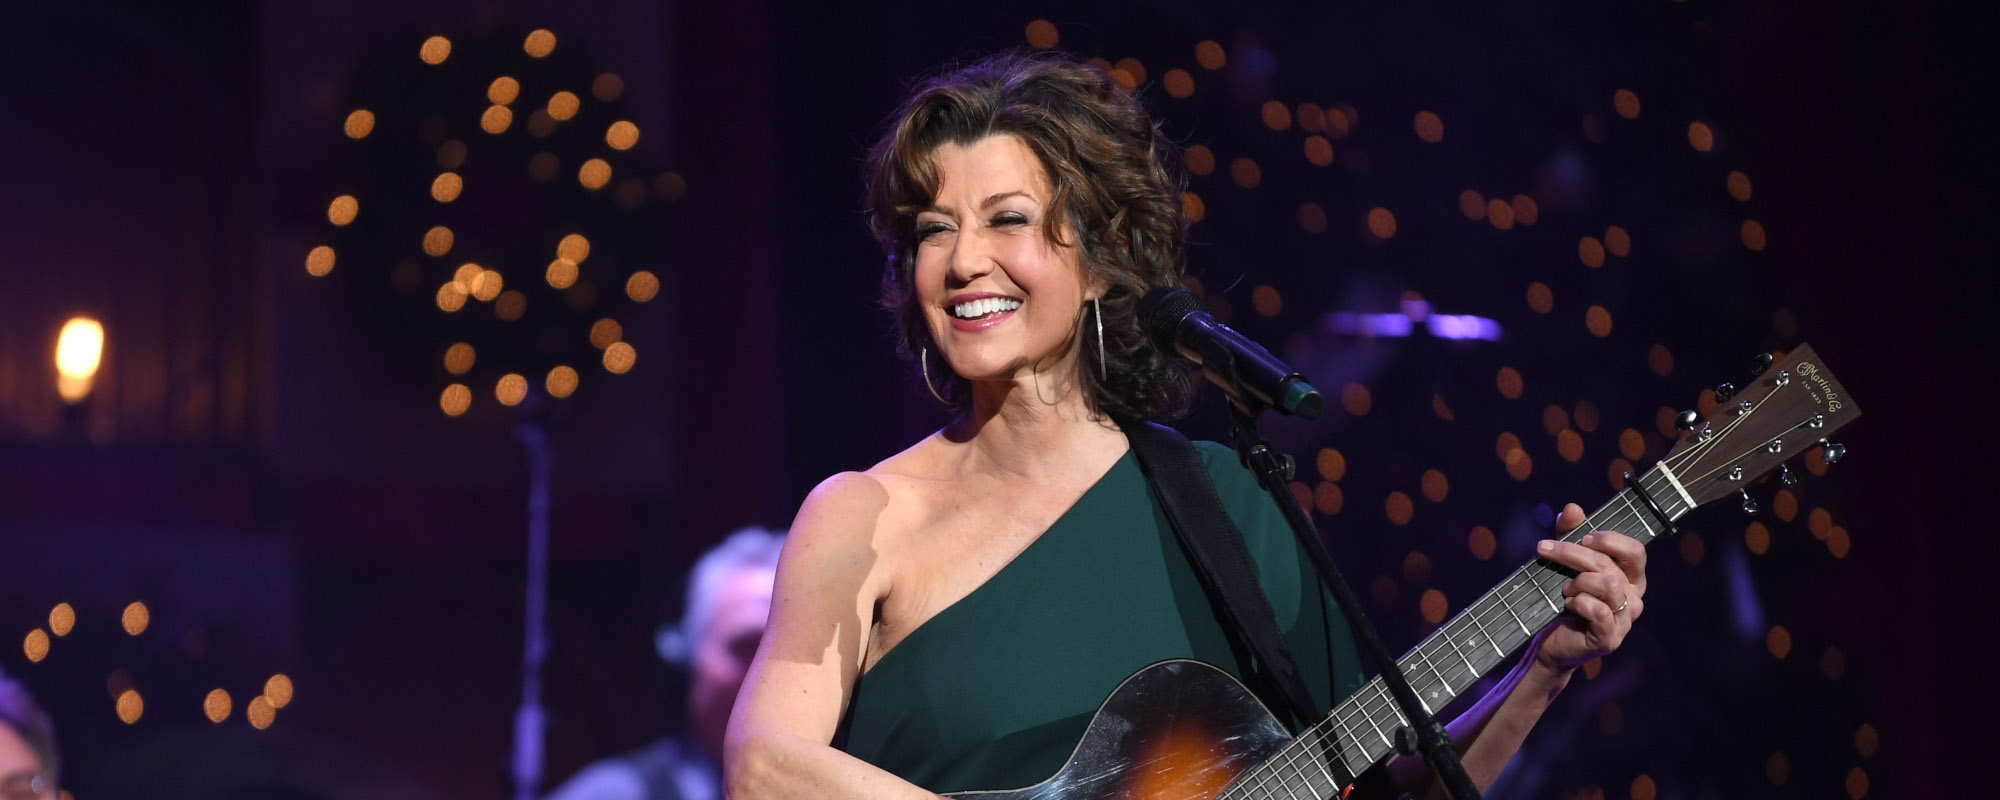 Amy Grant to Release First New Music in 10 Years with “Trees We’ll Never See”